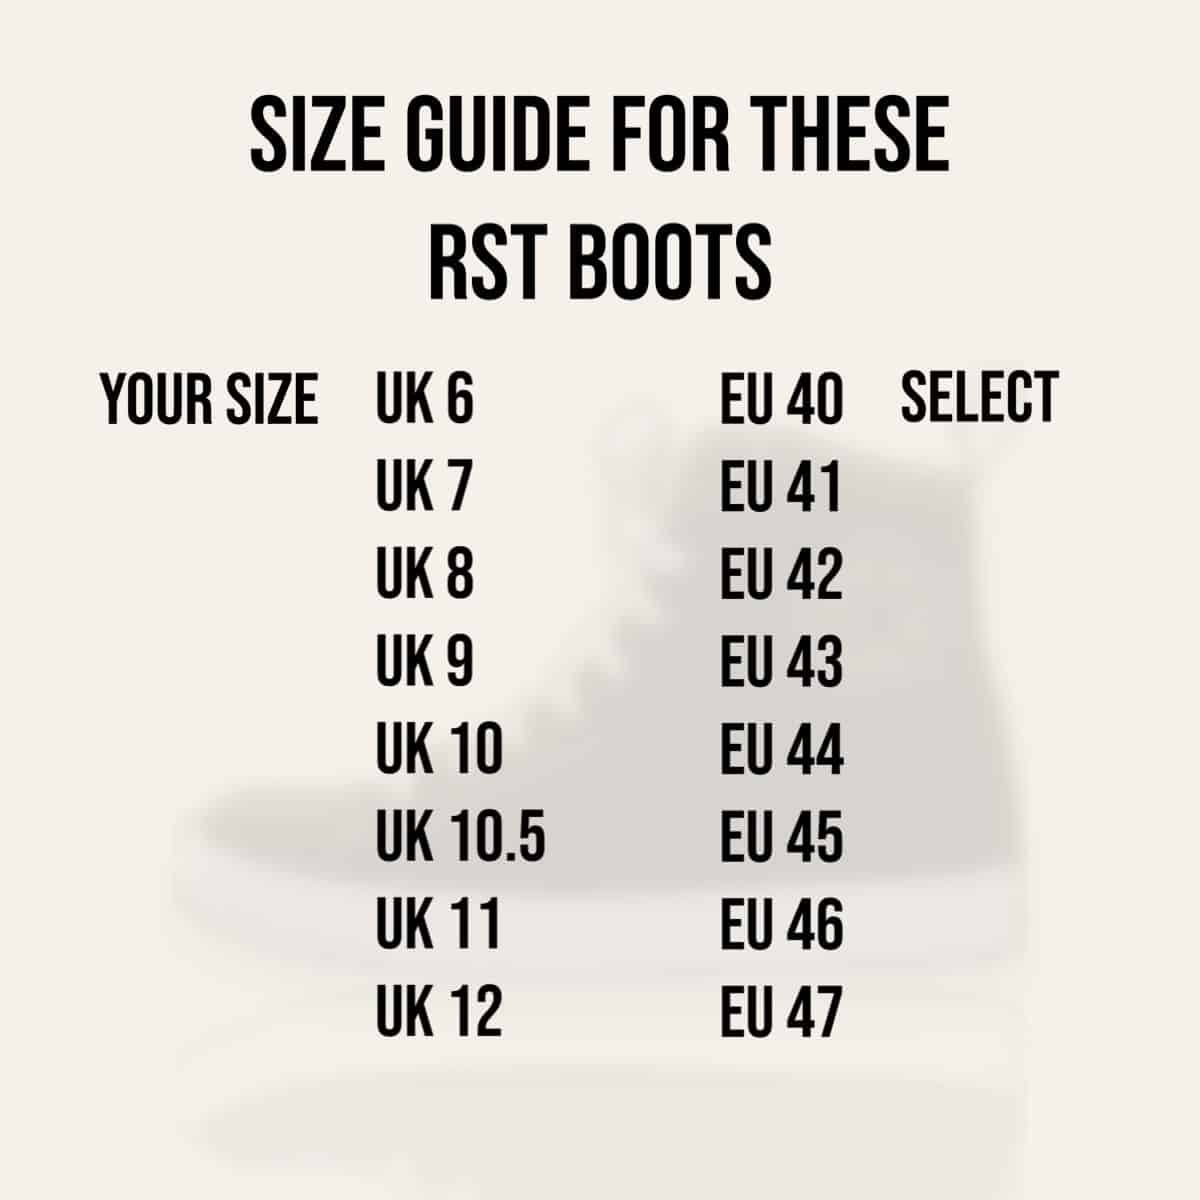 RST Urban 3 Moto size guide